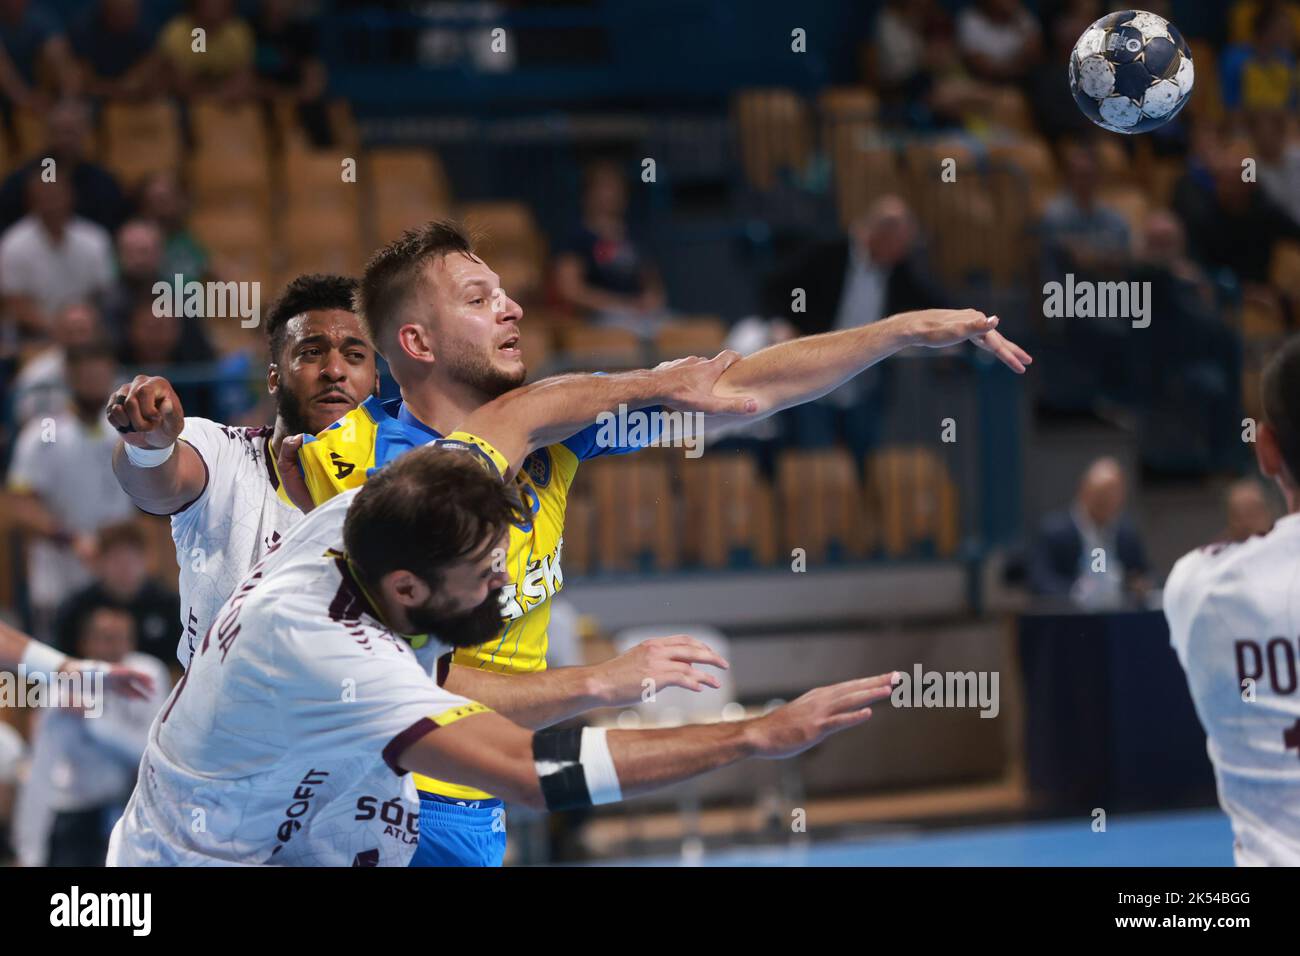 Celje, Slovenia. 5th Oct, 2022. Gal Marguc (C) of RK Celje competes during the 4th round of EHF Champions League MEN 2022/23 in Celje, Slovenia, Oct. 5, 2022. Credit: Zeljko Stevanic/Xinhua/Alamy Live News Stock Photo